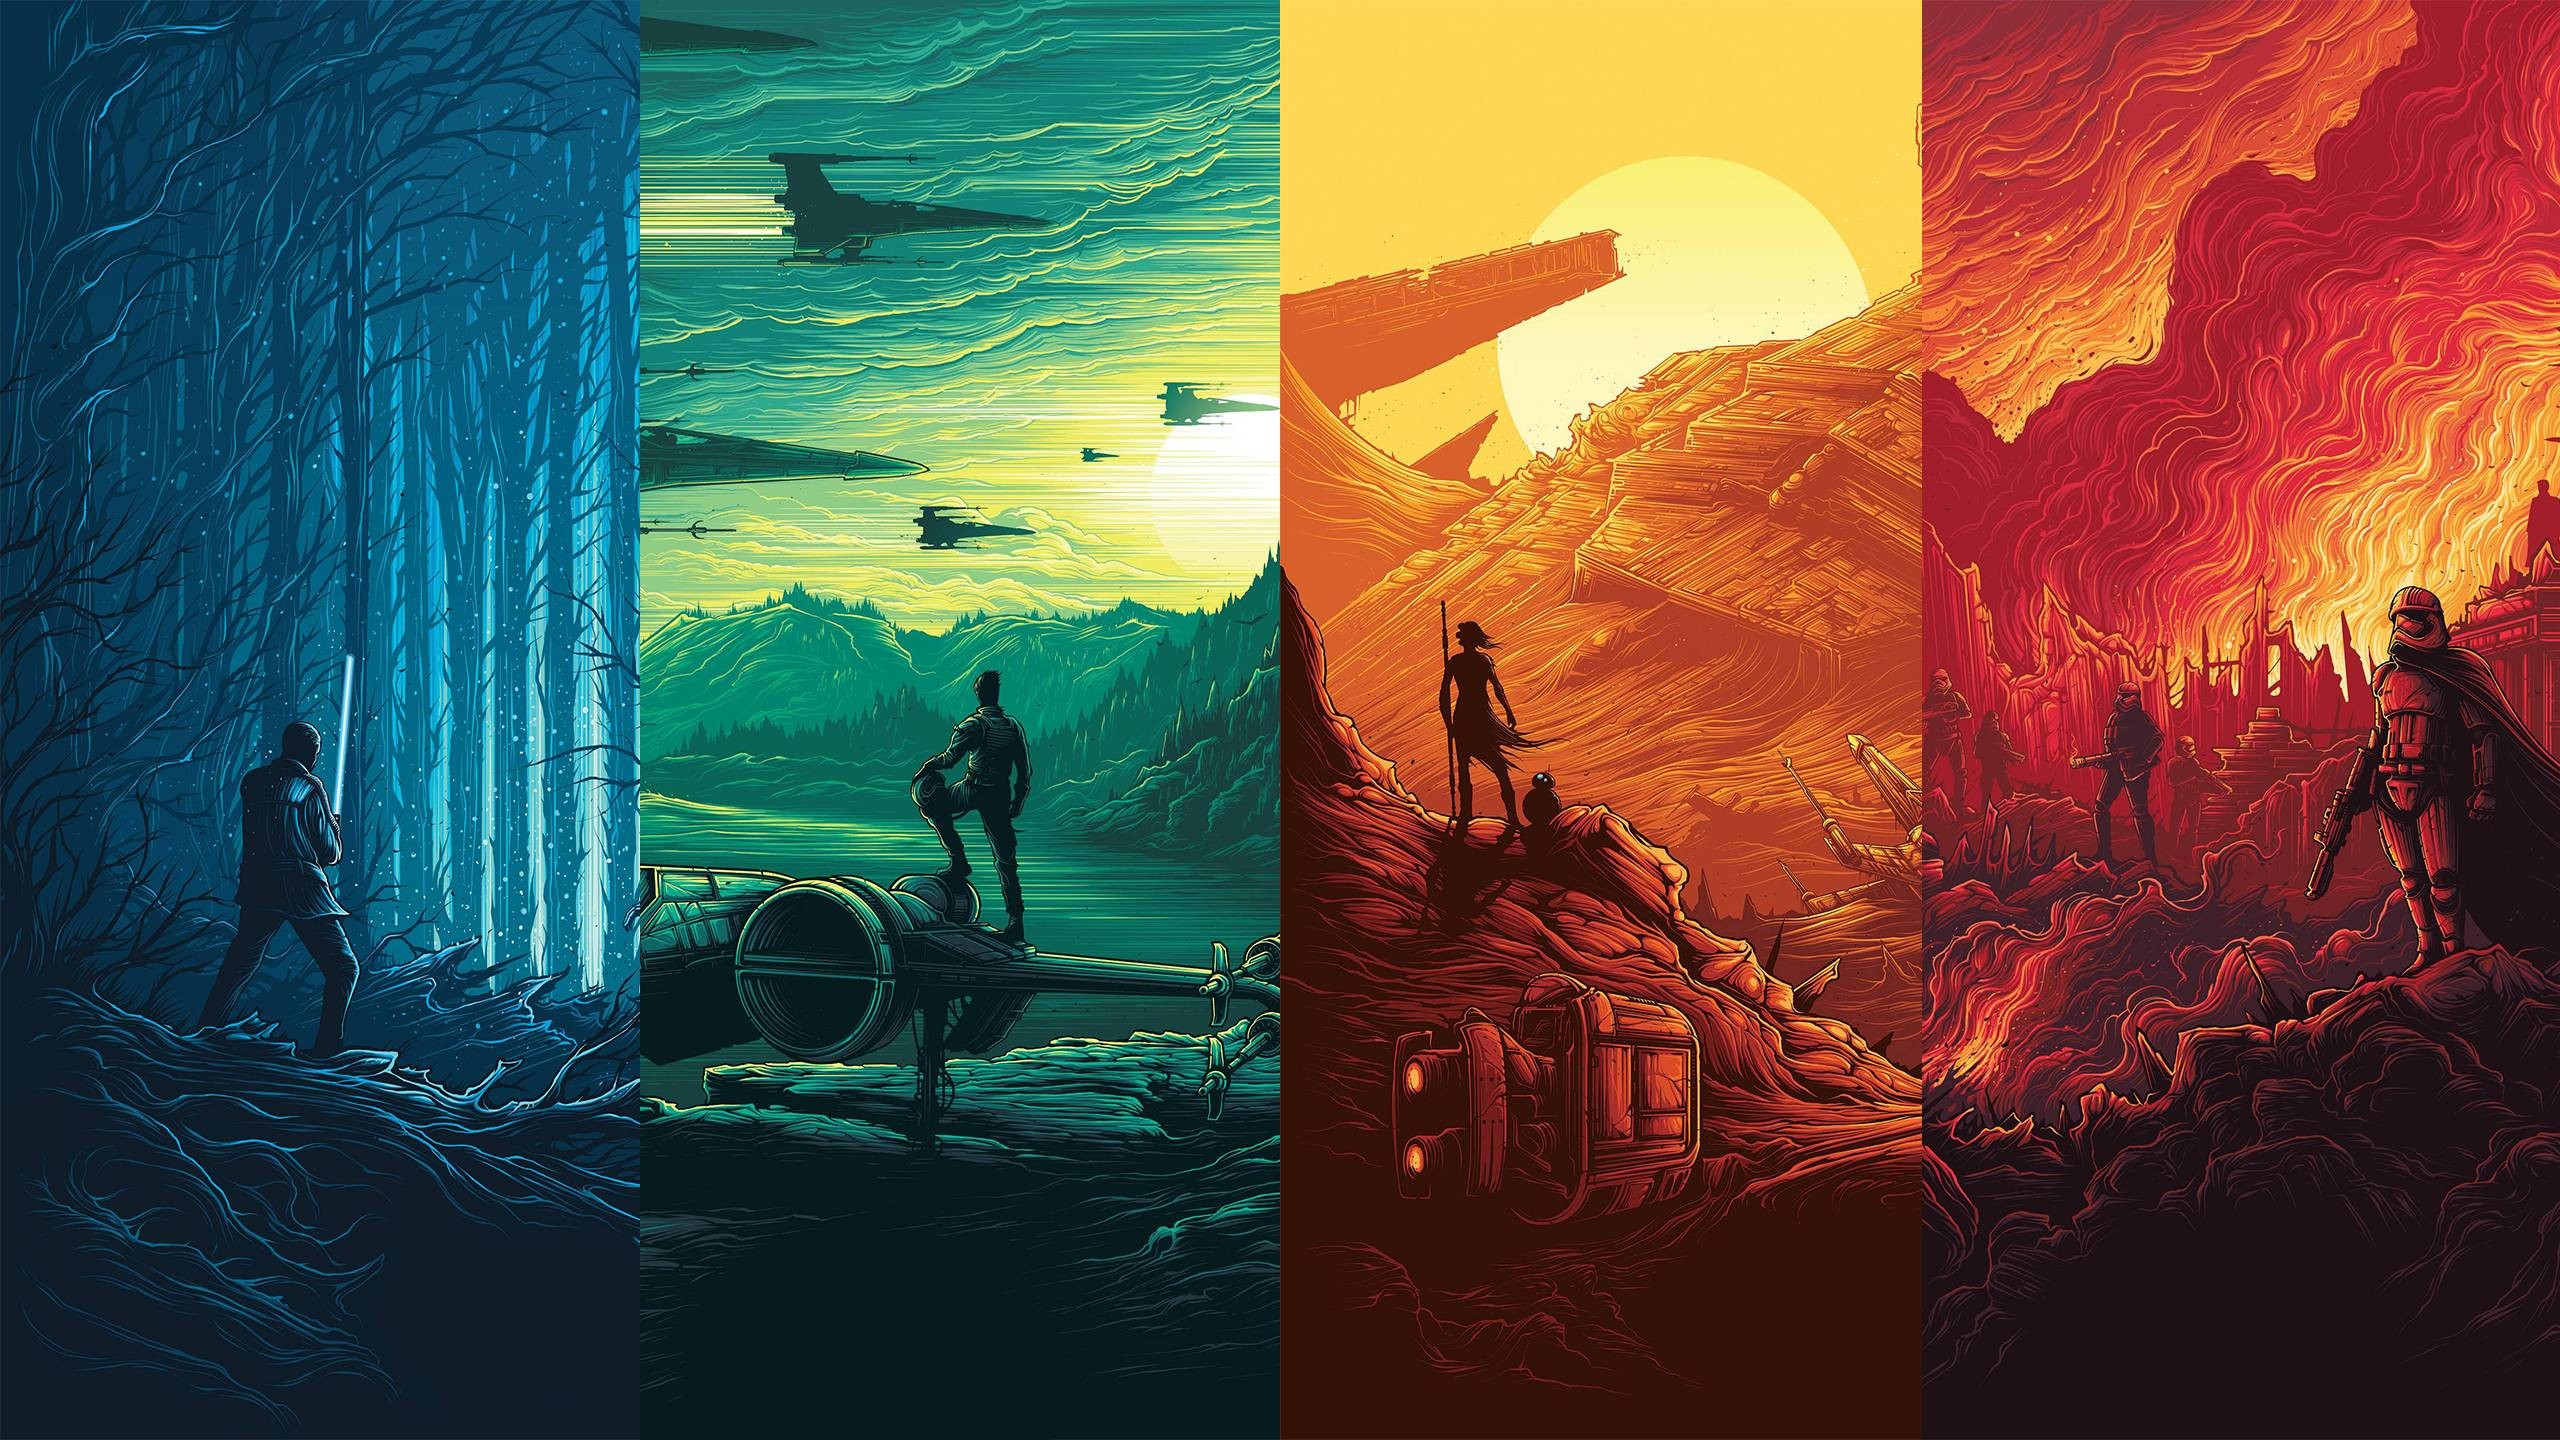 General 2560x1440 Star Wars: The Force Awakens collage Star Wars The First Order X-wing science fiction artwork panels colorful red orange green blue yellow